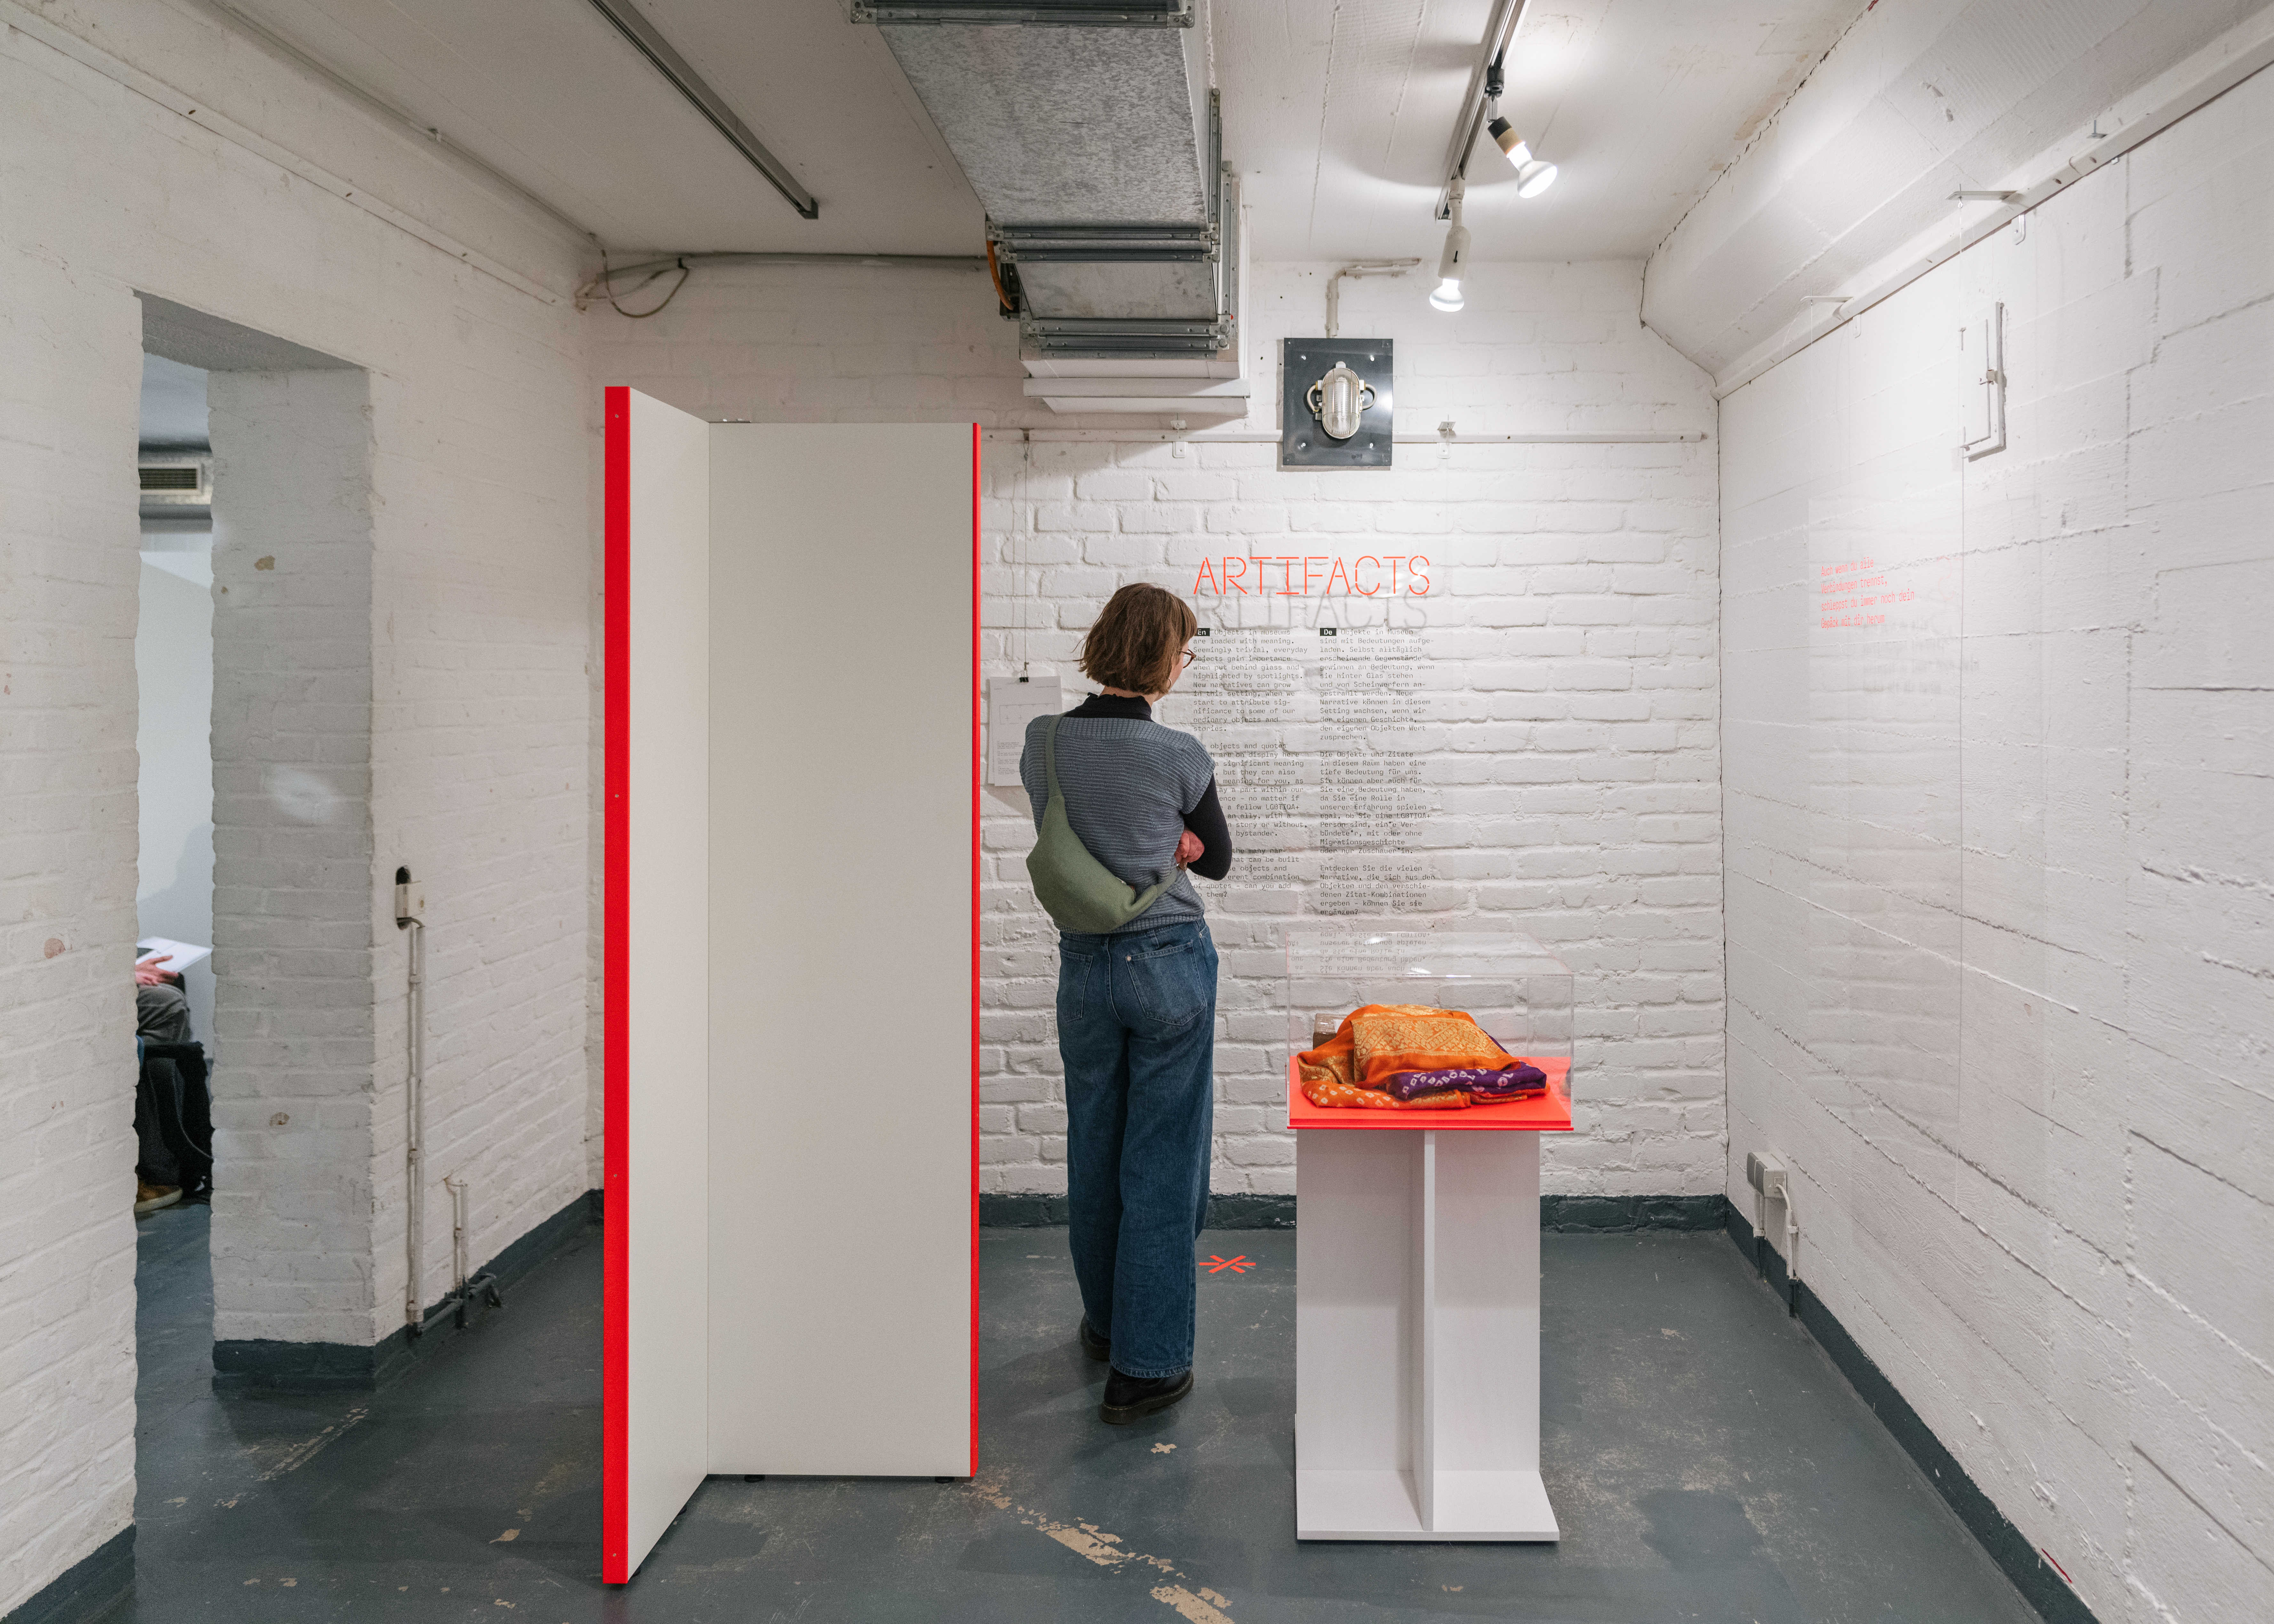 Visitors were invited to discover and add to the many narratives that emerge from the objects and the various combinations of quotations. Photo: Fadi Elias – In-Haus Media 2023